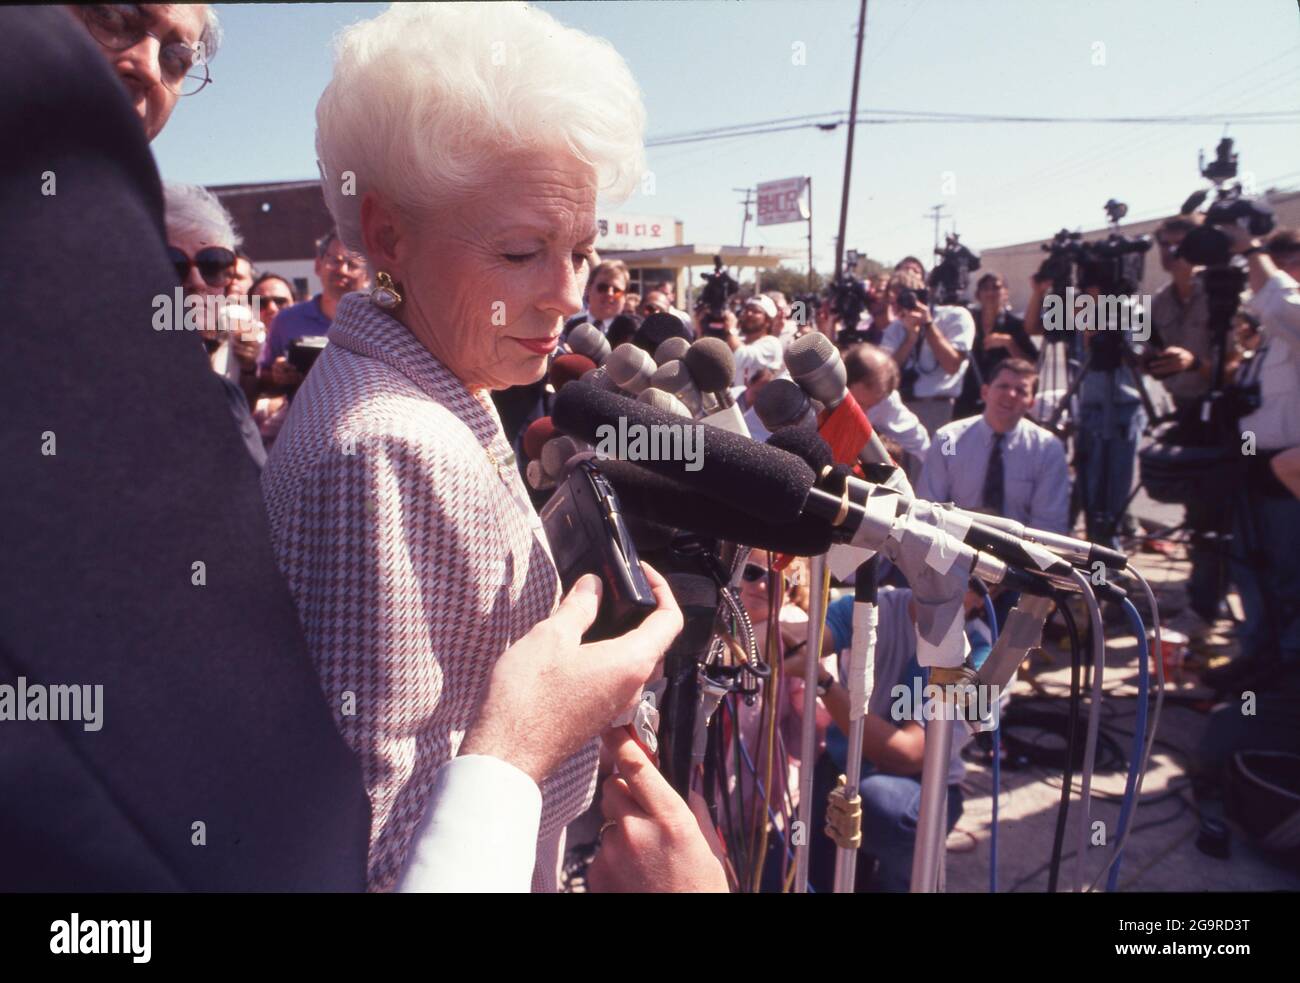 Killeen Texas USA, October 1991: A somber Texas Gov. Ann Richards talks to the press after attending a memorial service for victims of a mass shooting at Luby's Cafeteria in Killeen on October 16. George Hennard, a 35-year-old Killeen resident, crashed a pickup into the eatery and shot 23 people to death before killing himself. ©Bob Daemmrich Stock Photo